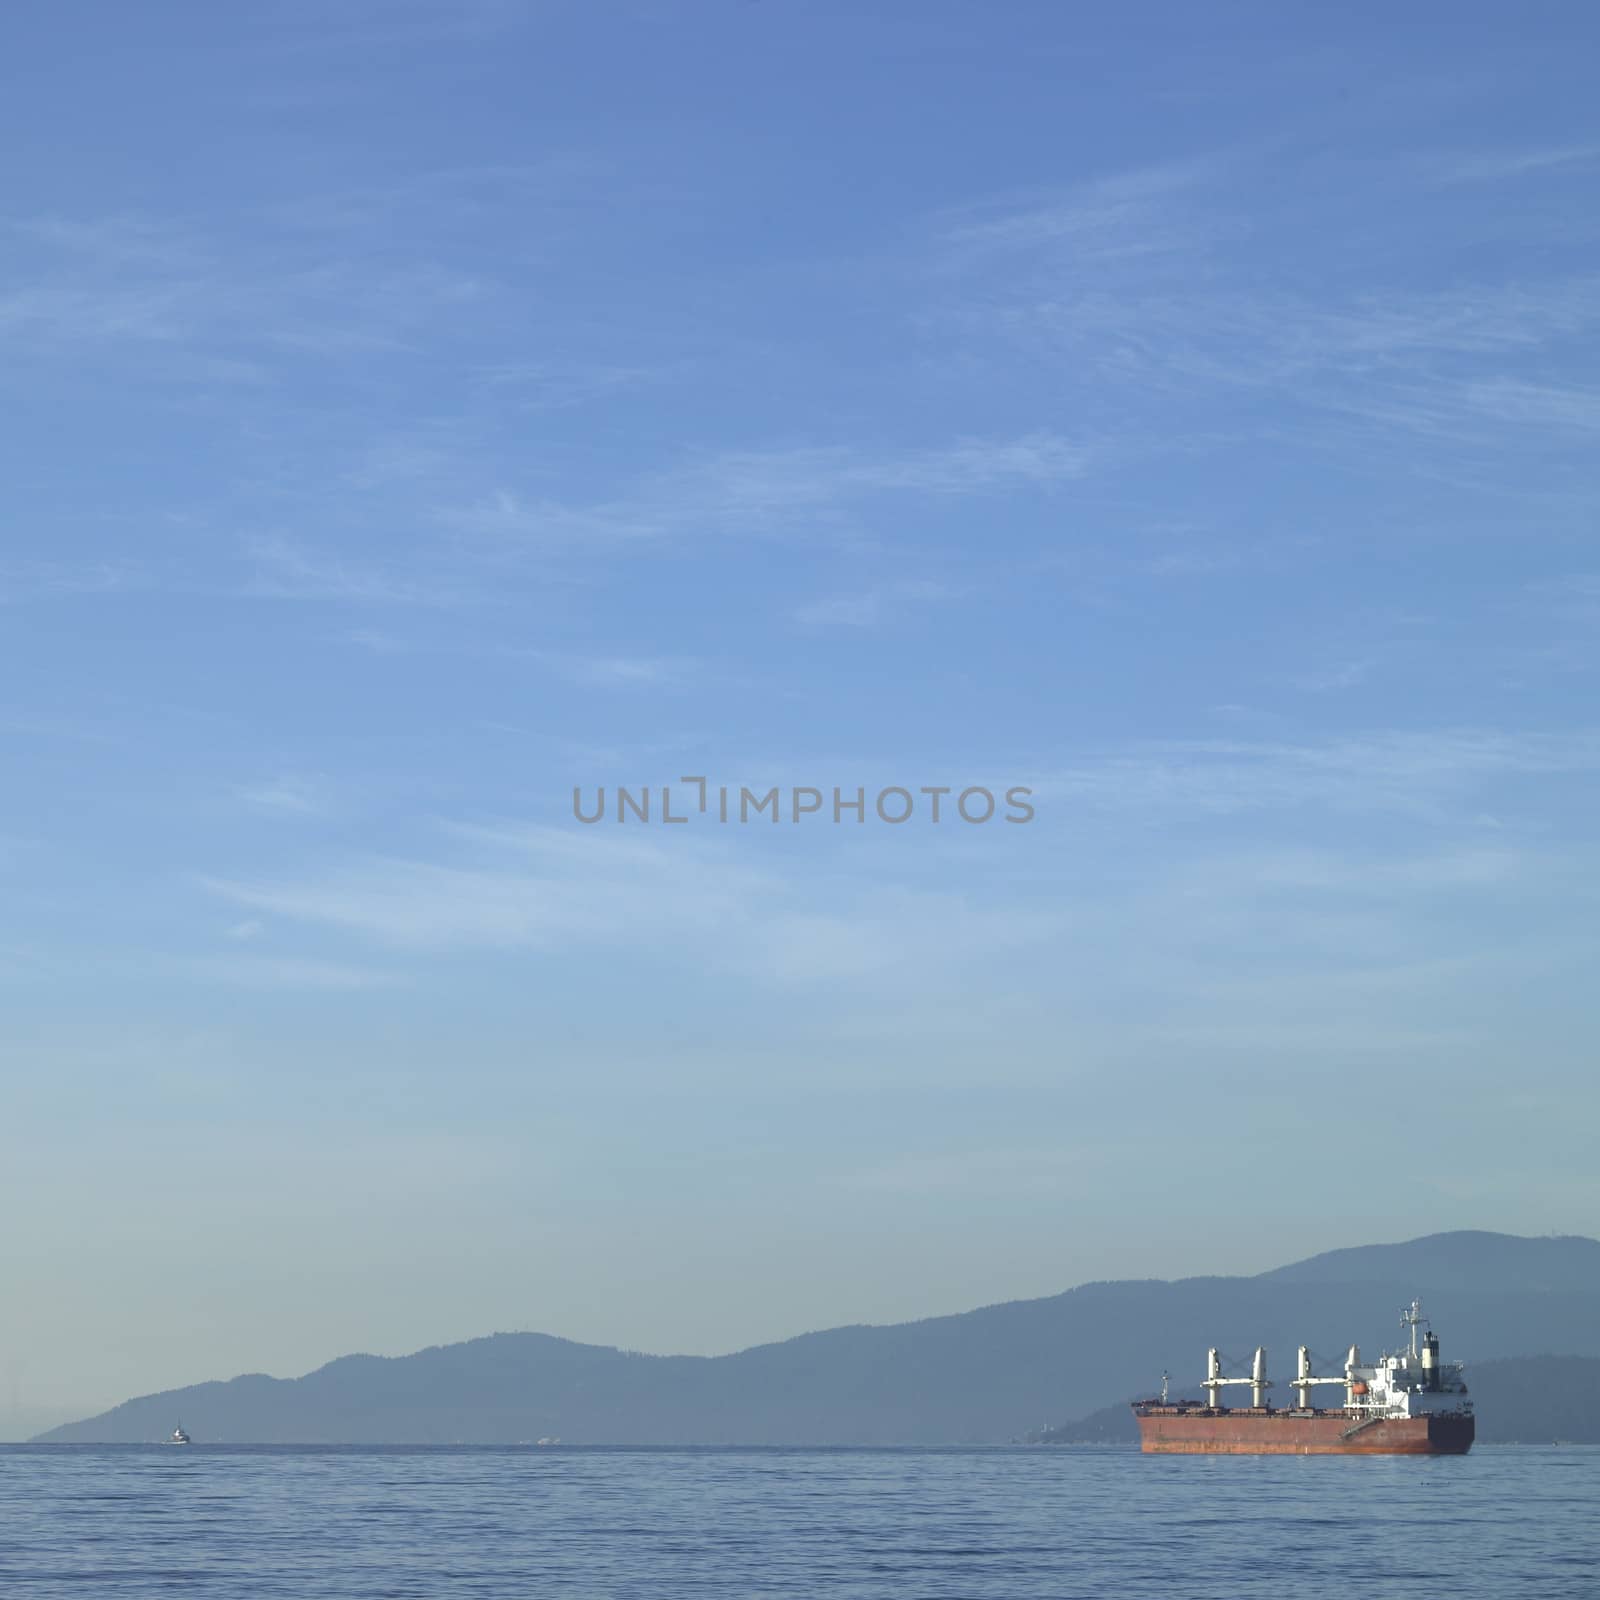 Large vessel on the ocean with mountains in the background